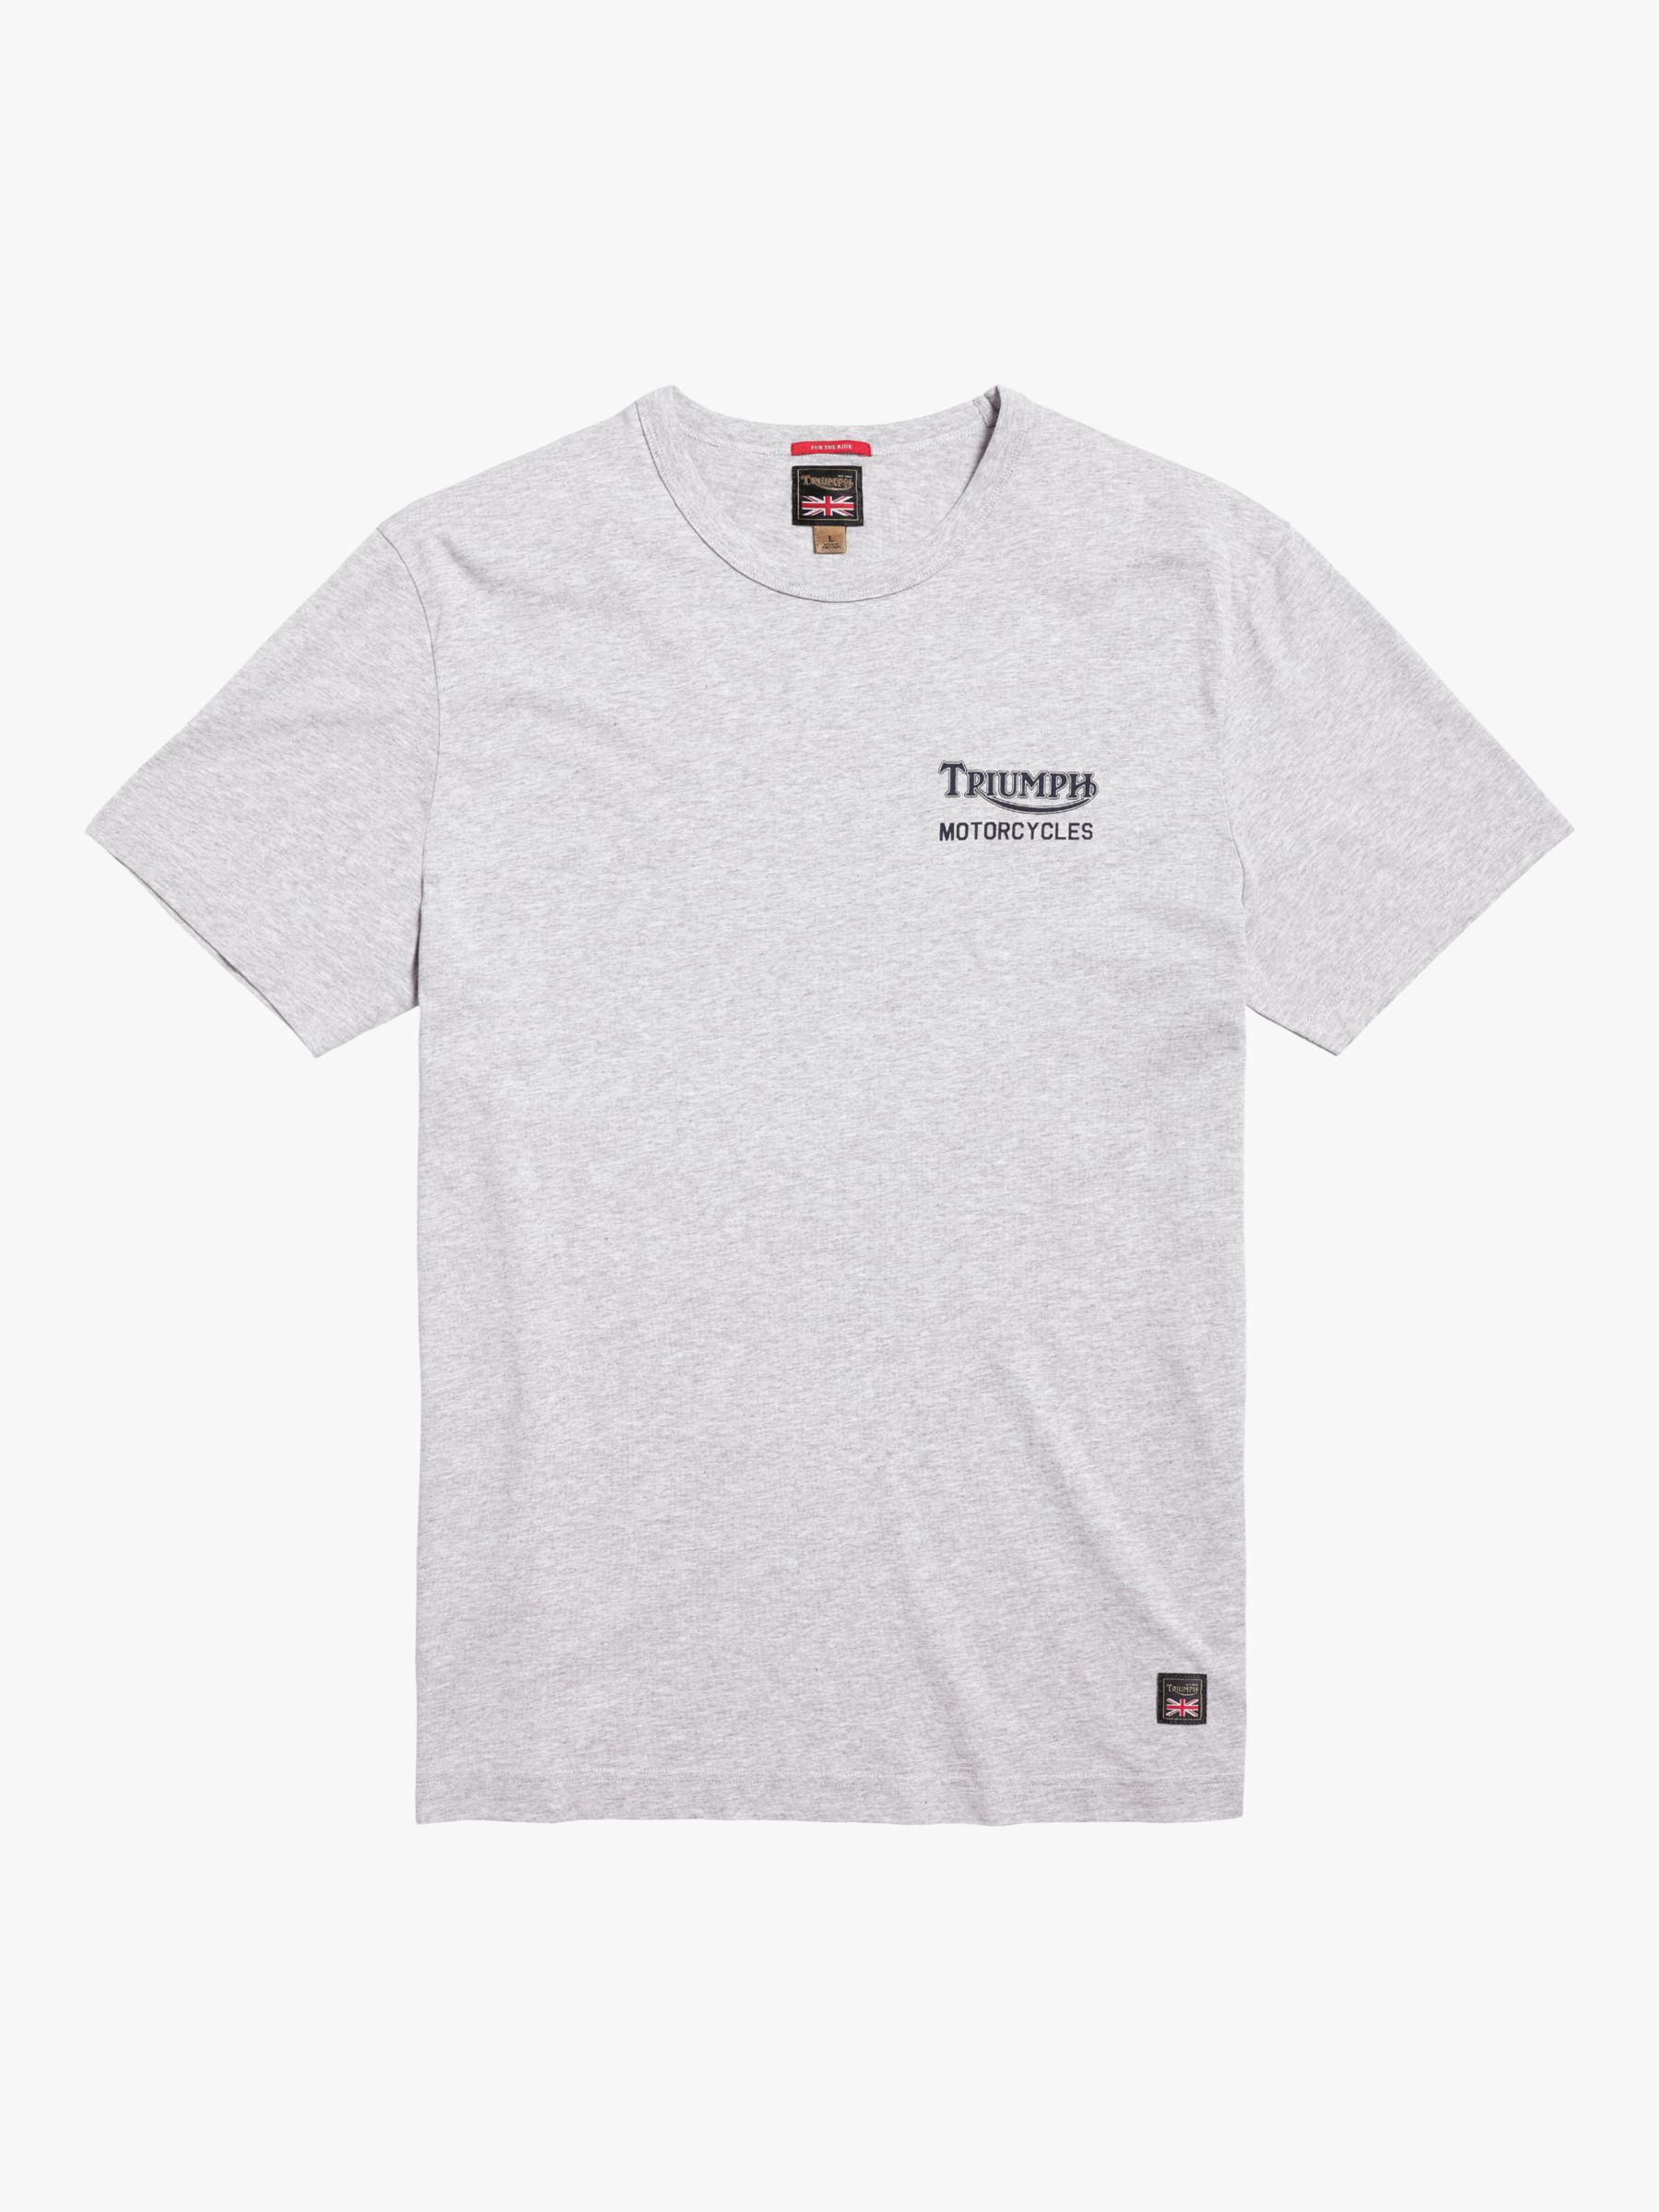 Triumph Motorcycles Adcote T-Shirt, Silver Marl, S